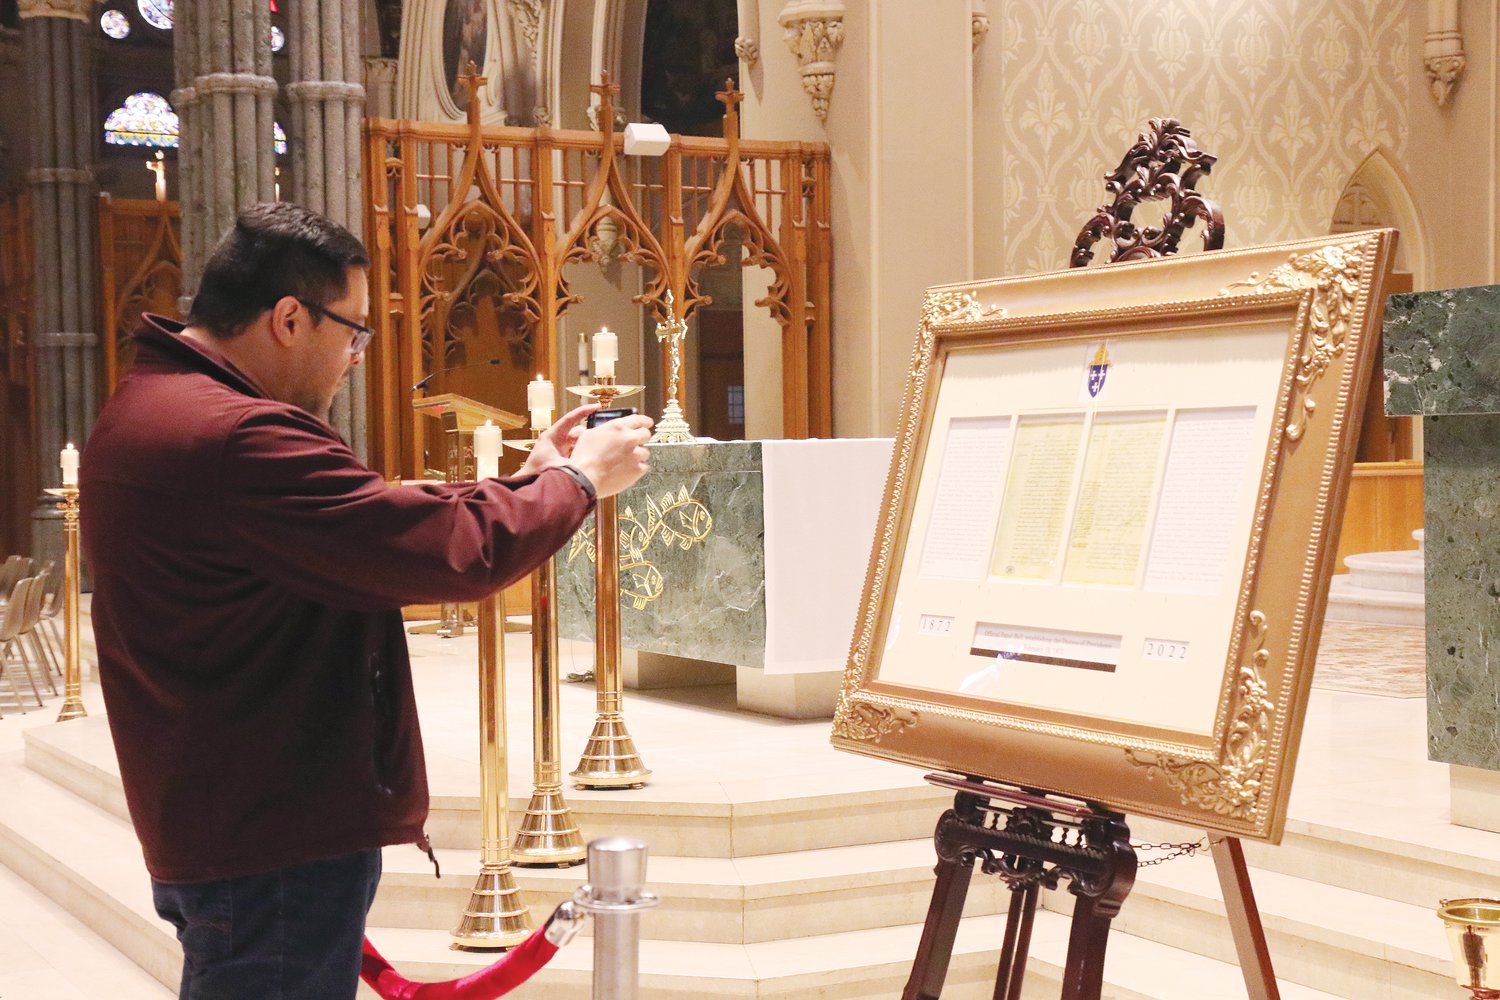 On Sunday, Dec. 5, Bishop Thomas J. Tobin blessed an authentic copy of the papal bull issued by the Holy See on February 16, 1872. Many gathered to get a close up look at the Vatican document signed by Pope Pius IX which created the Diocese of Providence.